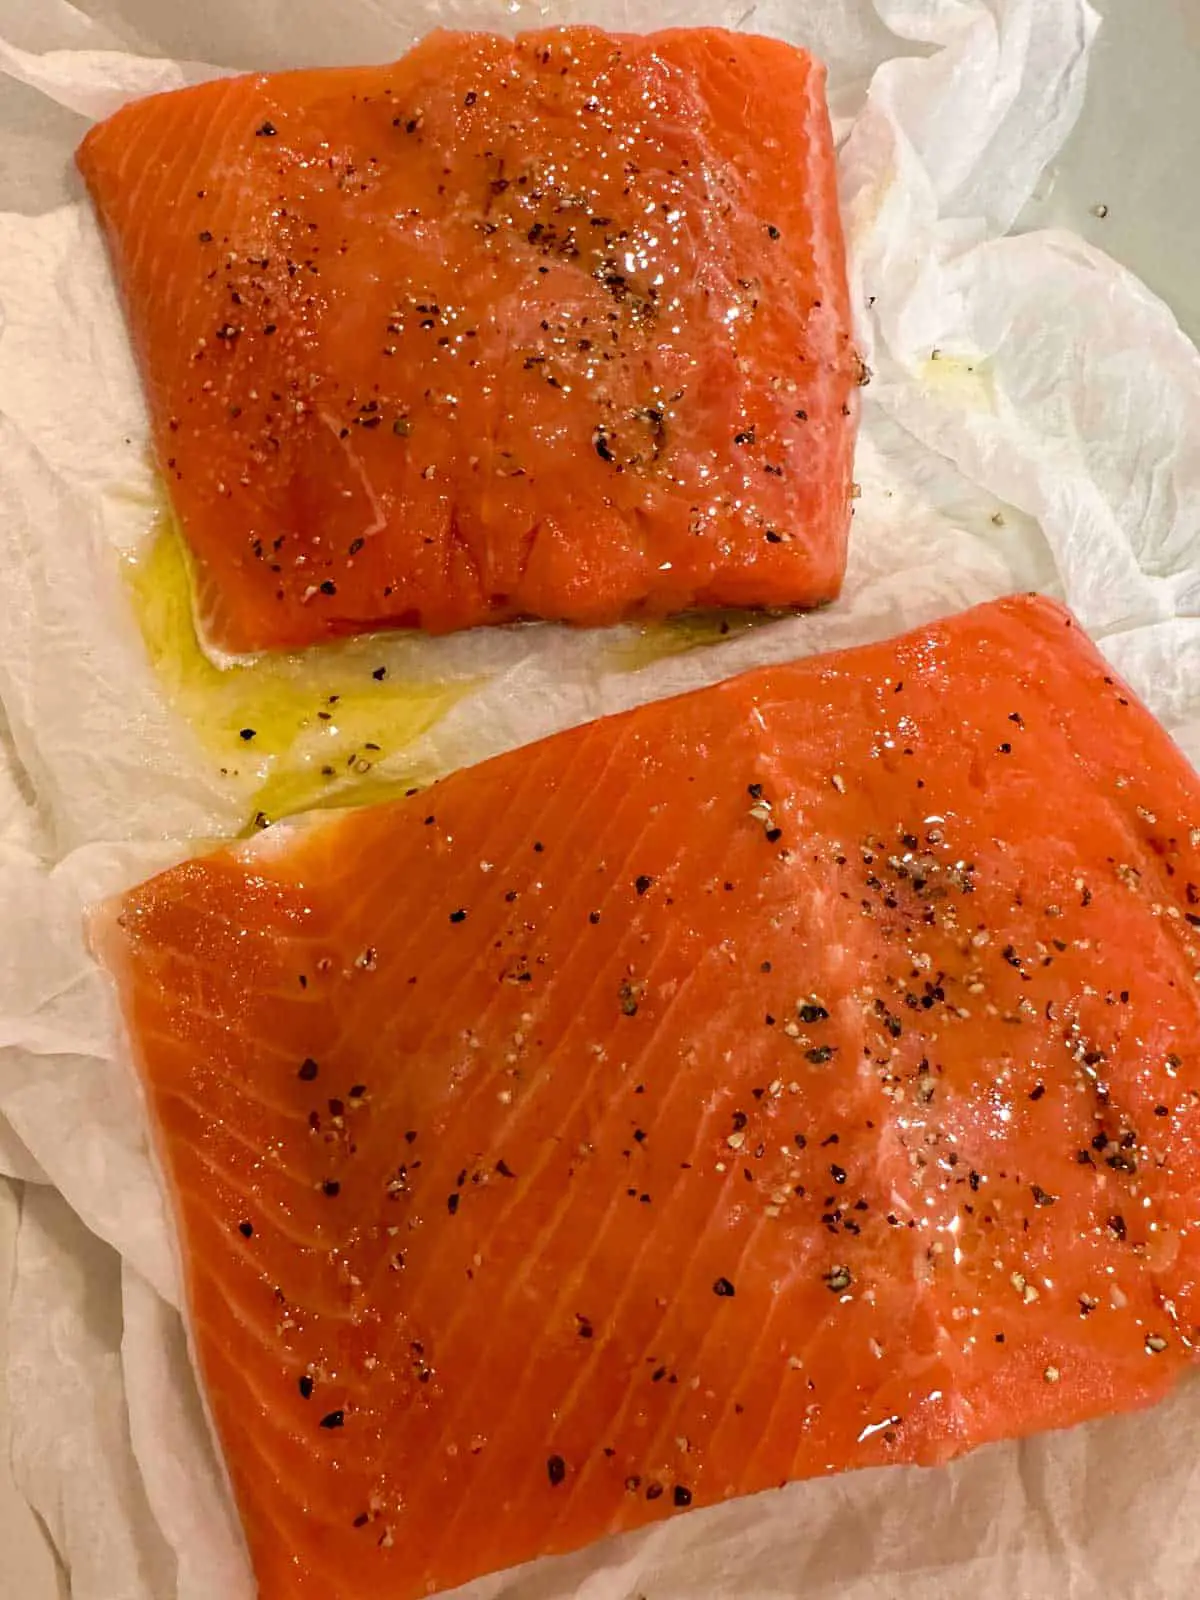 Raw salmon fillets seasoned with salt and pepper and drizzled with olive oil atop paper towels.